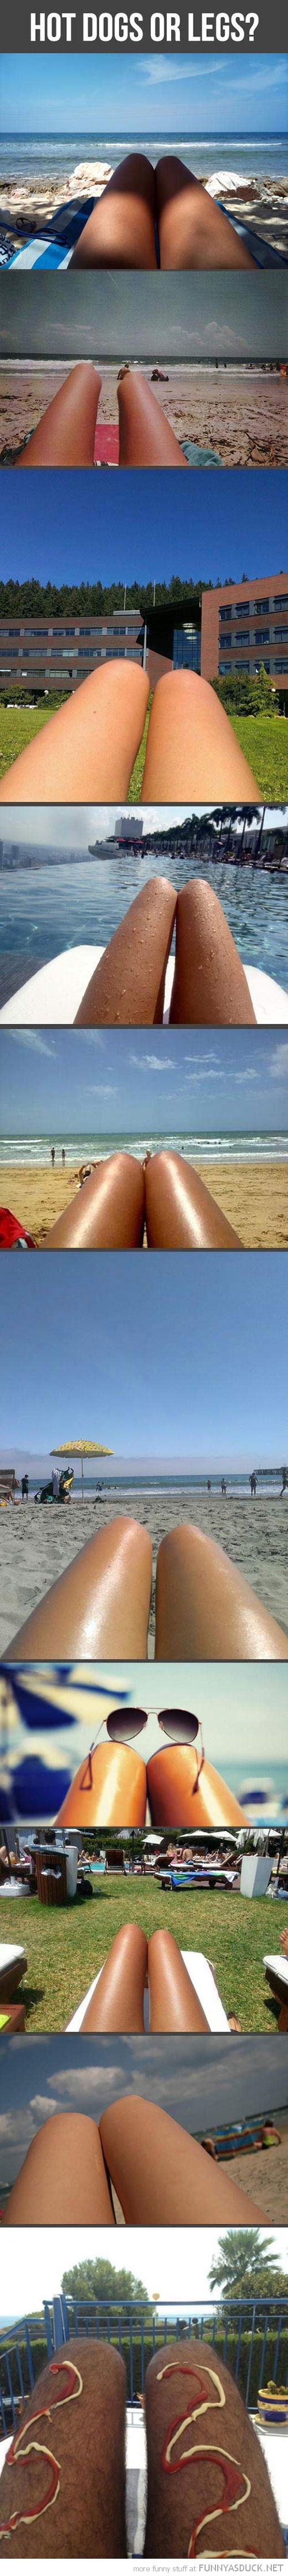 Hot Dogs Or Legs?